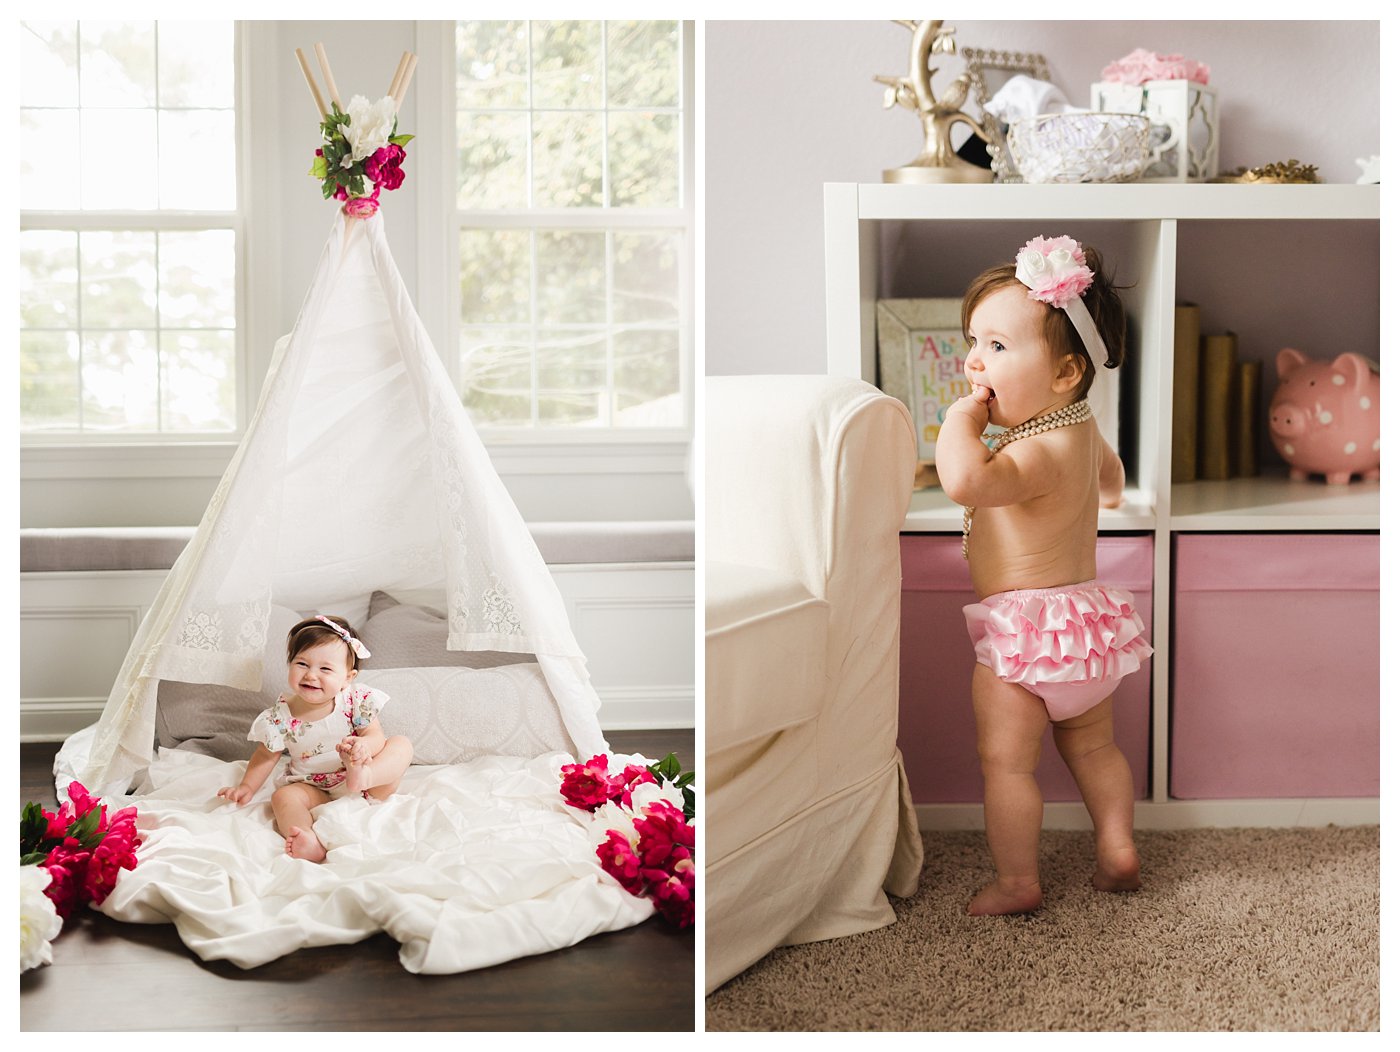 Floral Teepee Photo Session for 1 Year Old